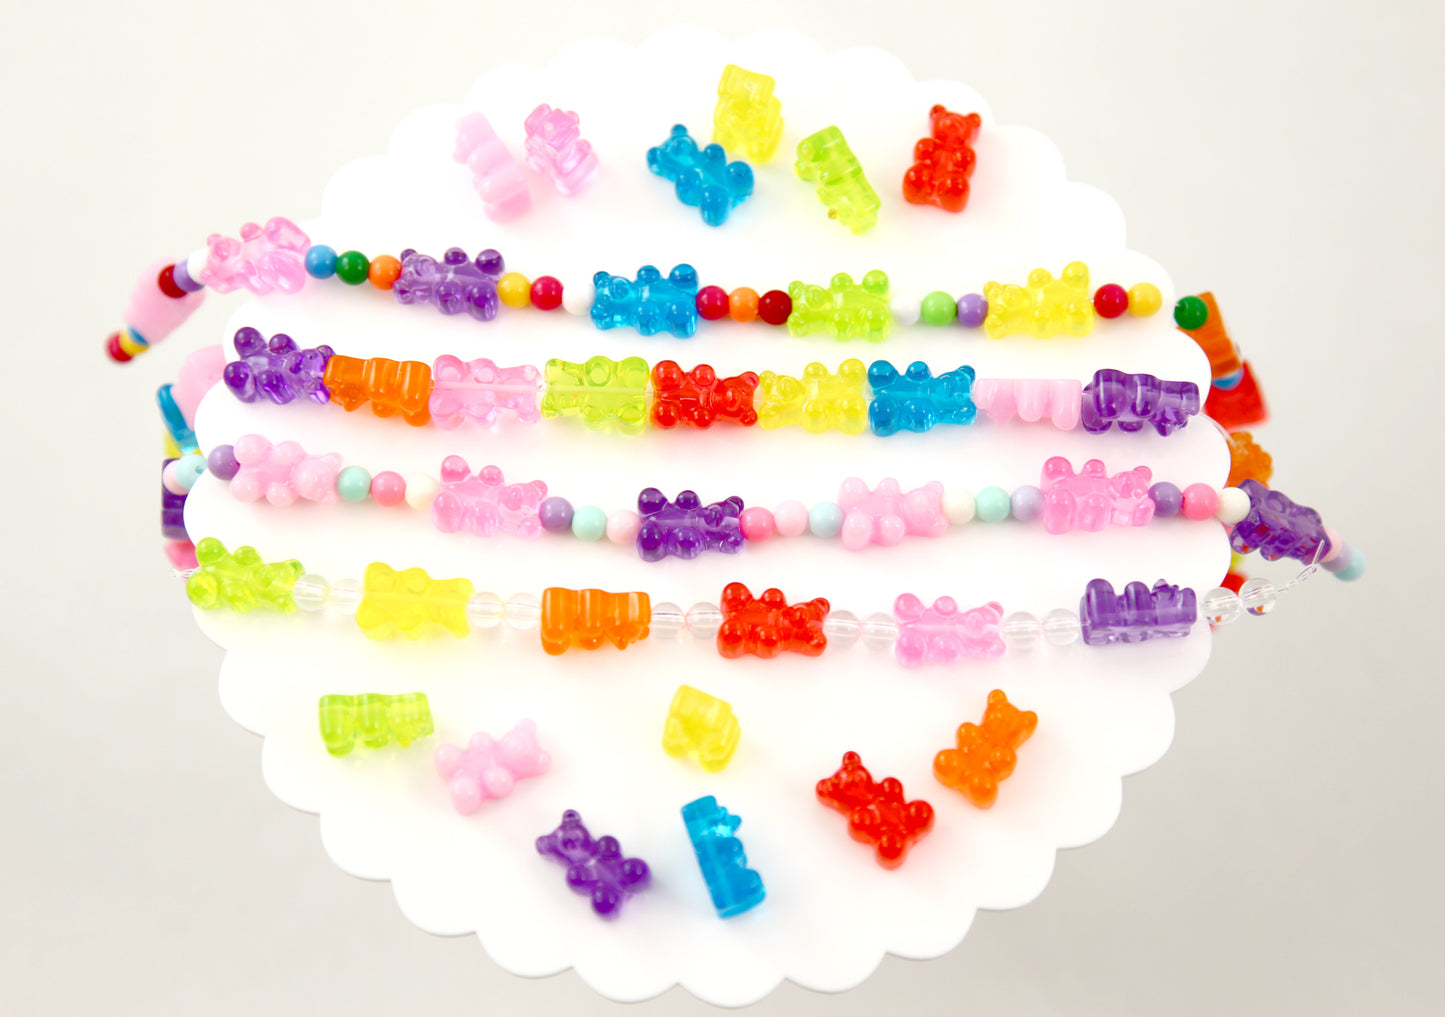 Gummy Bear Beads - 17mm Fake Gummy Bears with Hole for Stringing - Fake Candy Resin Beads - 16 pc set